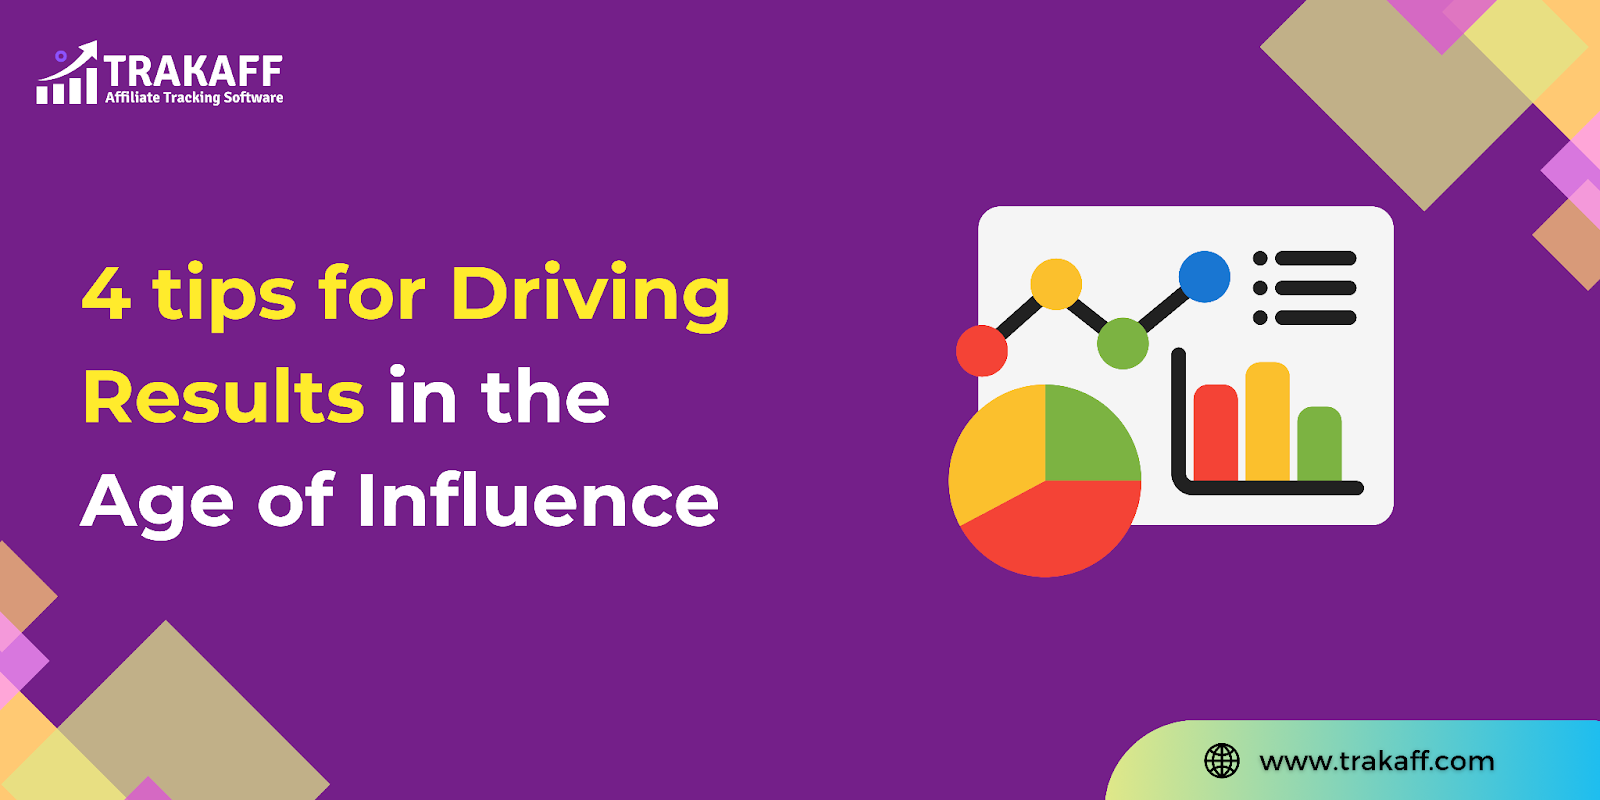 4 tips for Driving Results in the Age of Influence